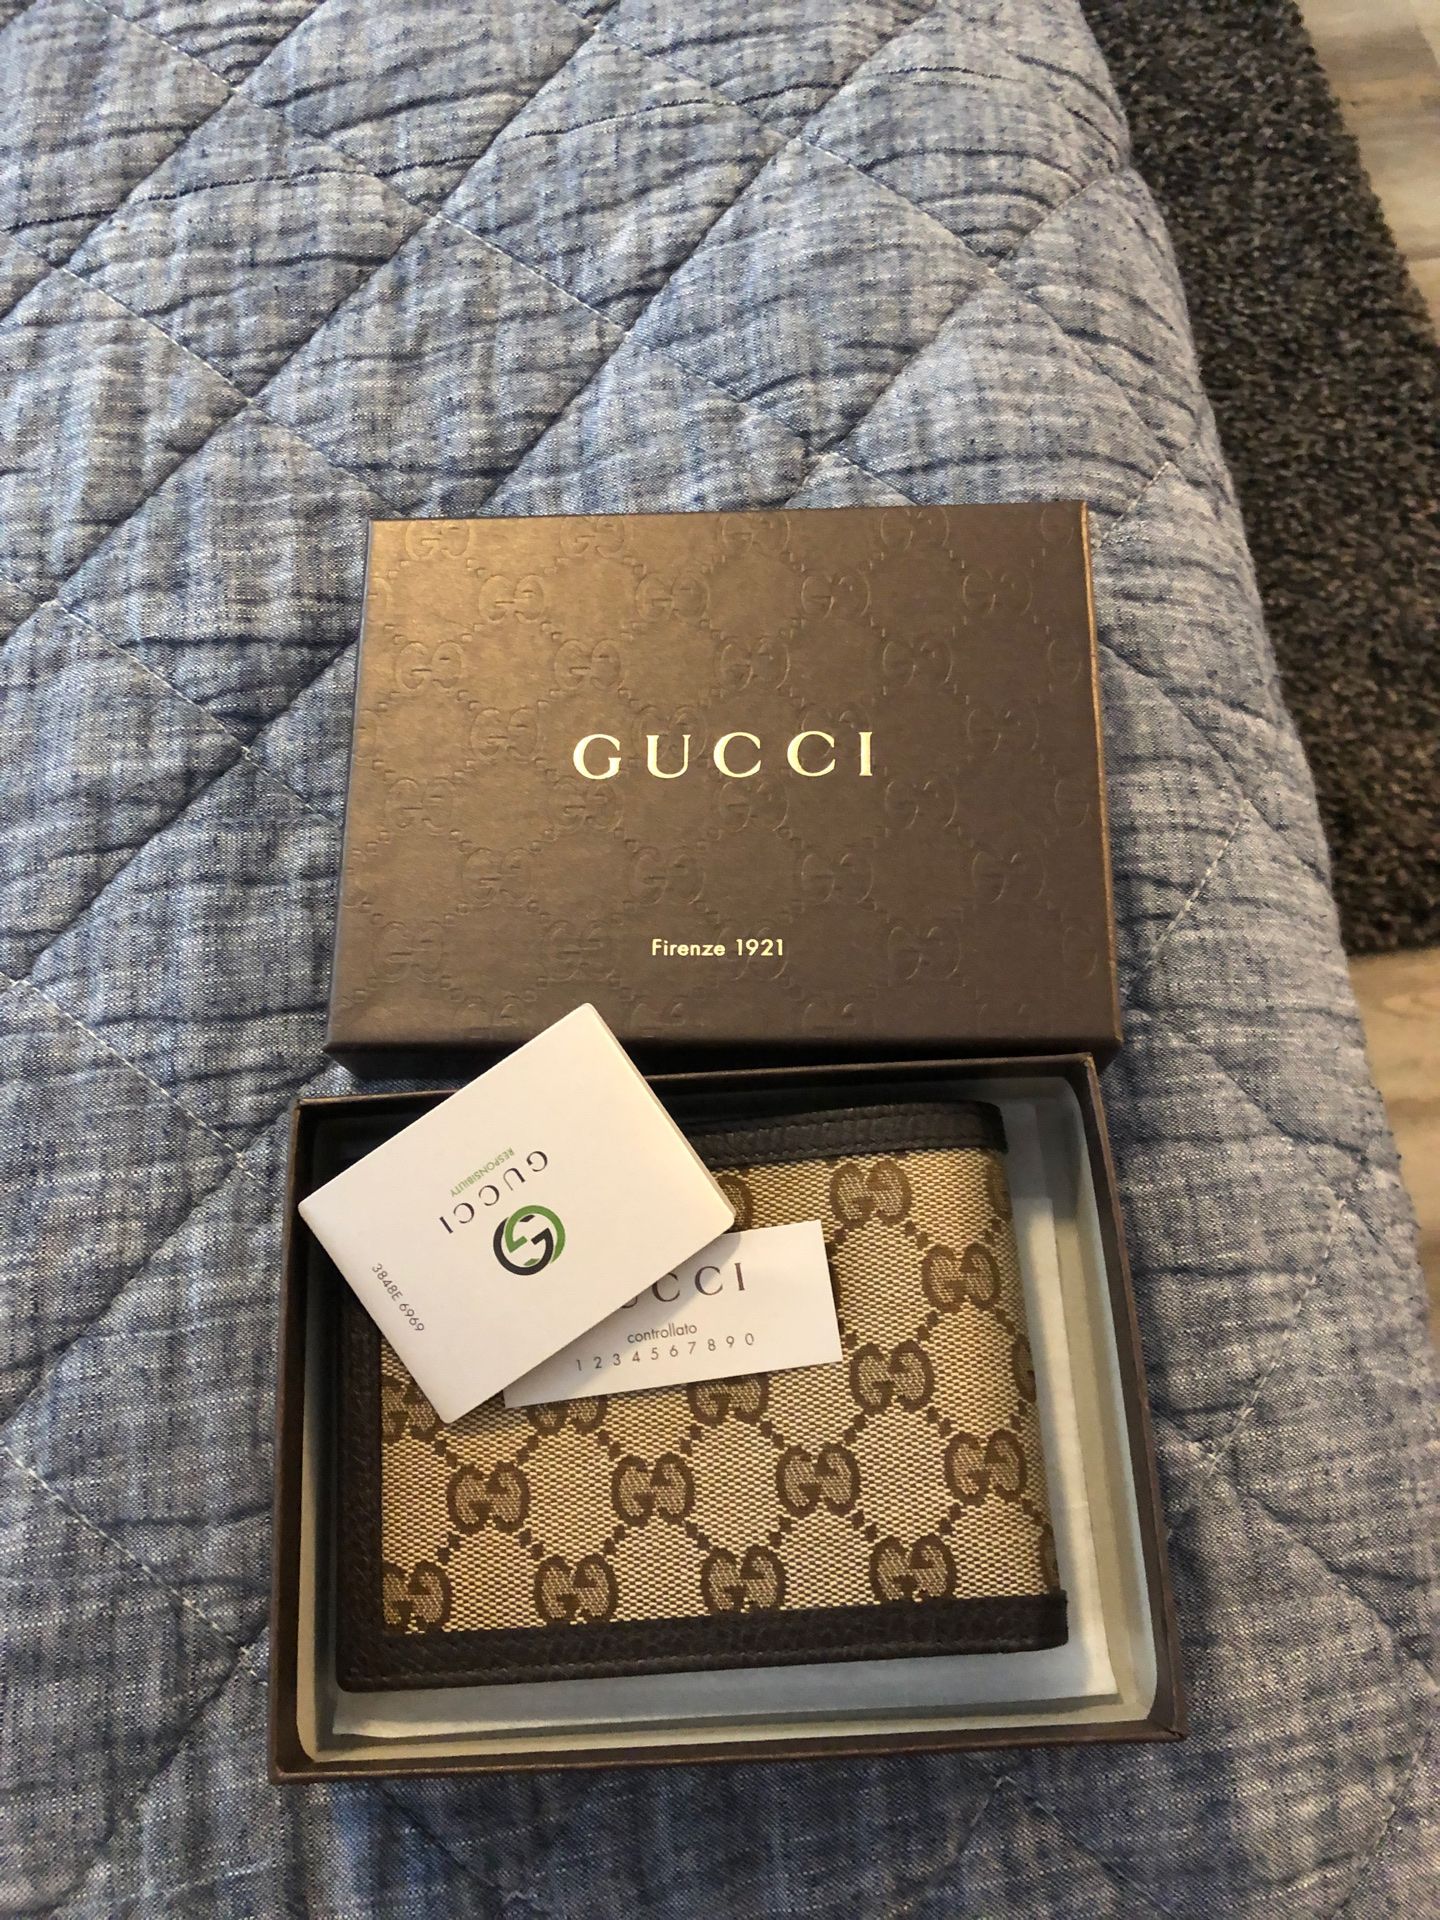 Gucci wallet never used